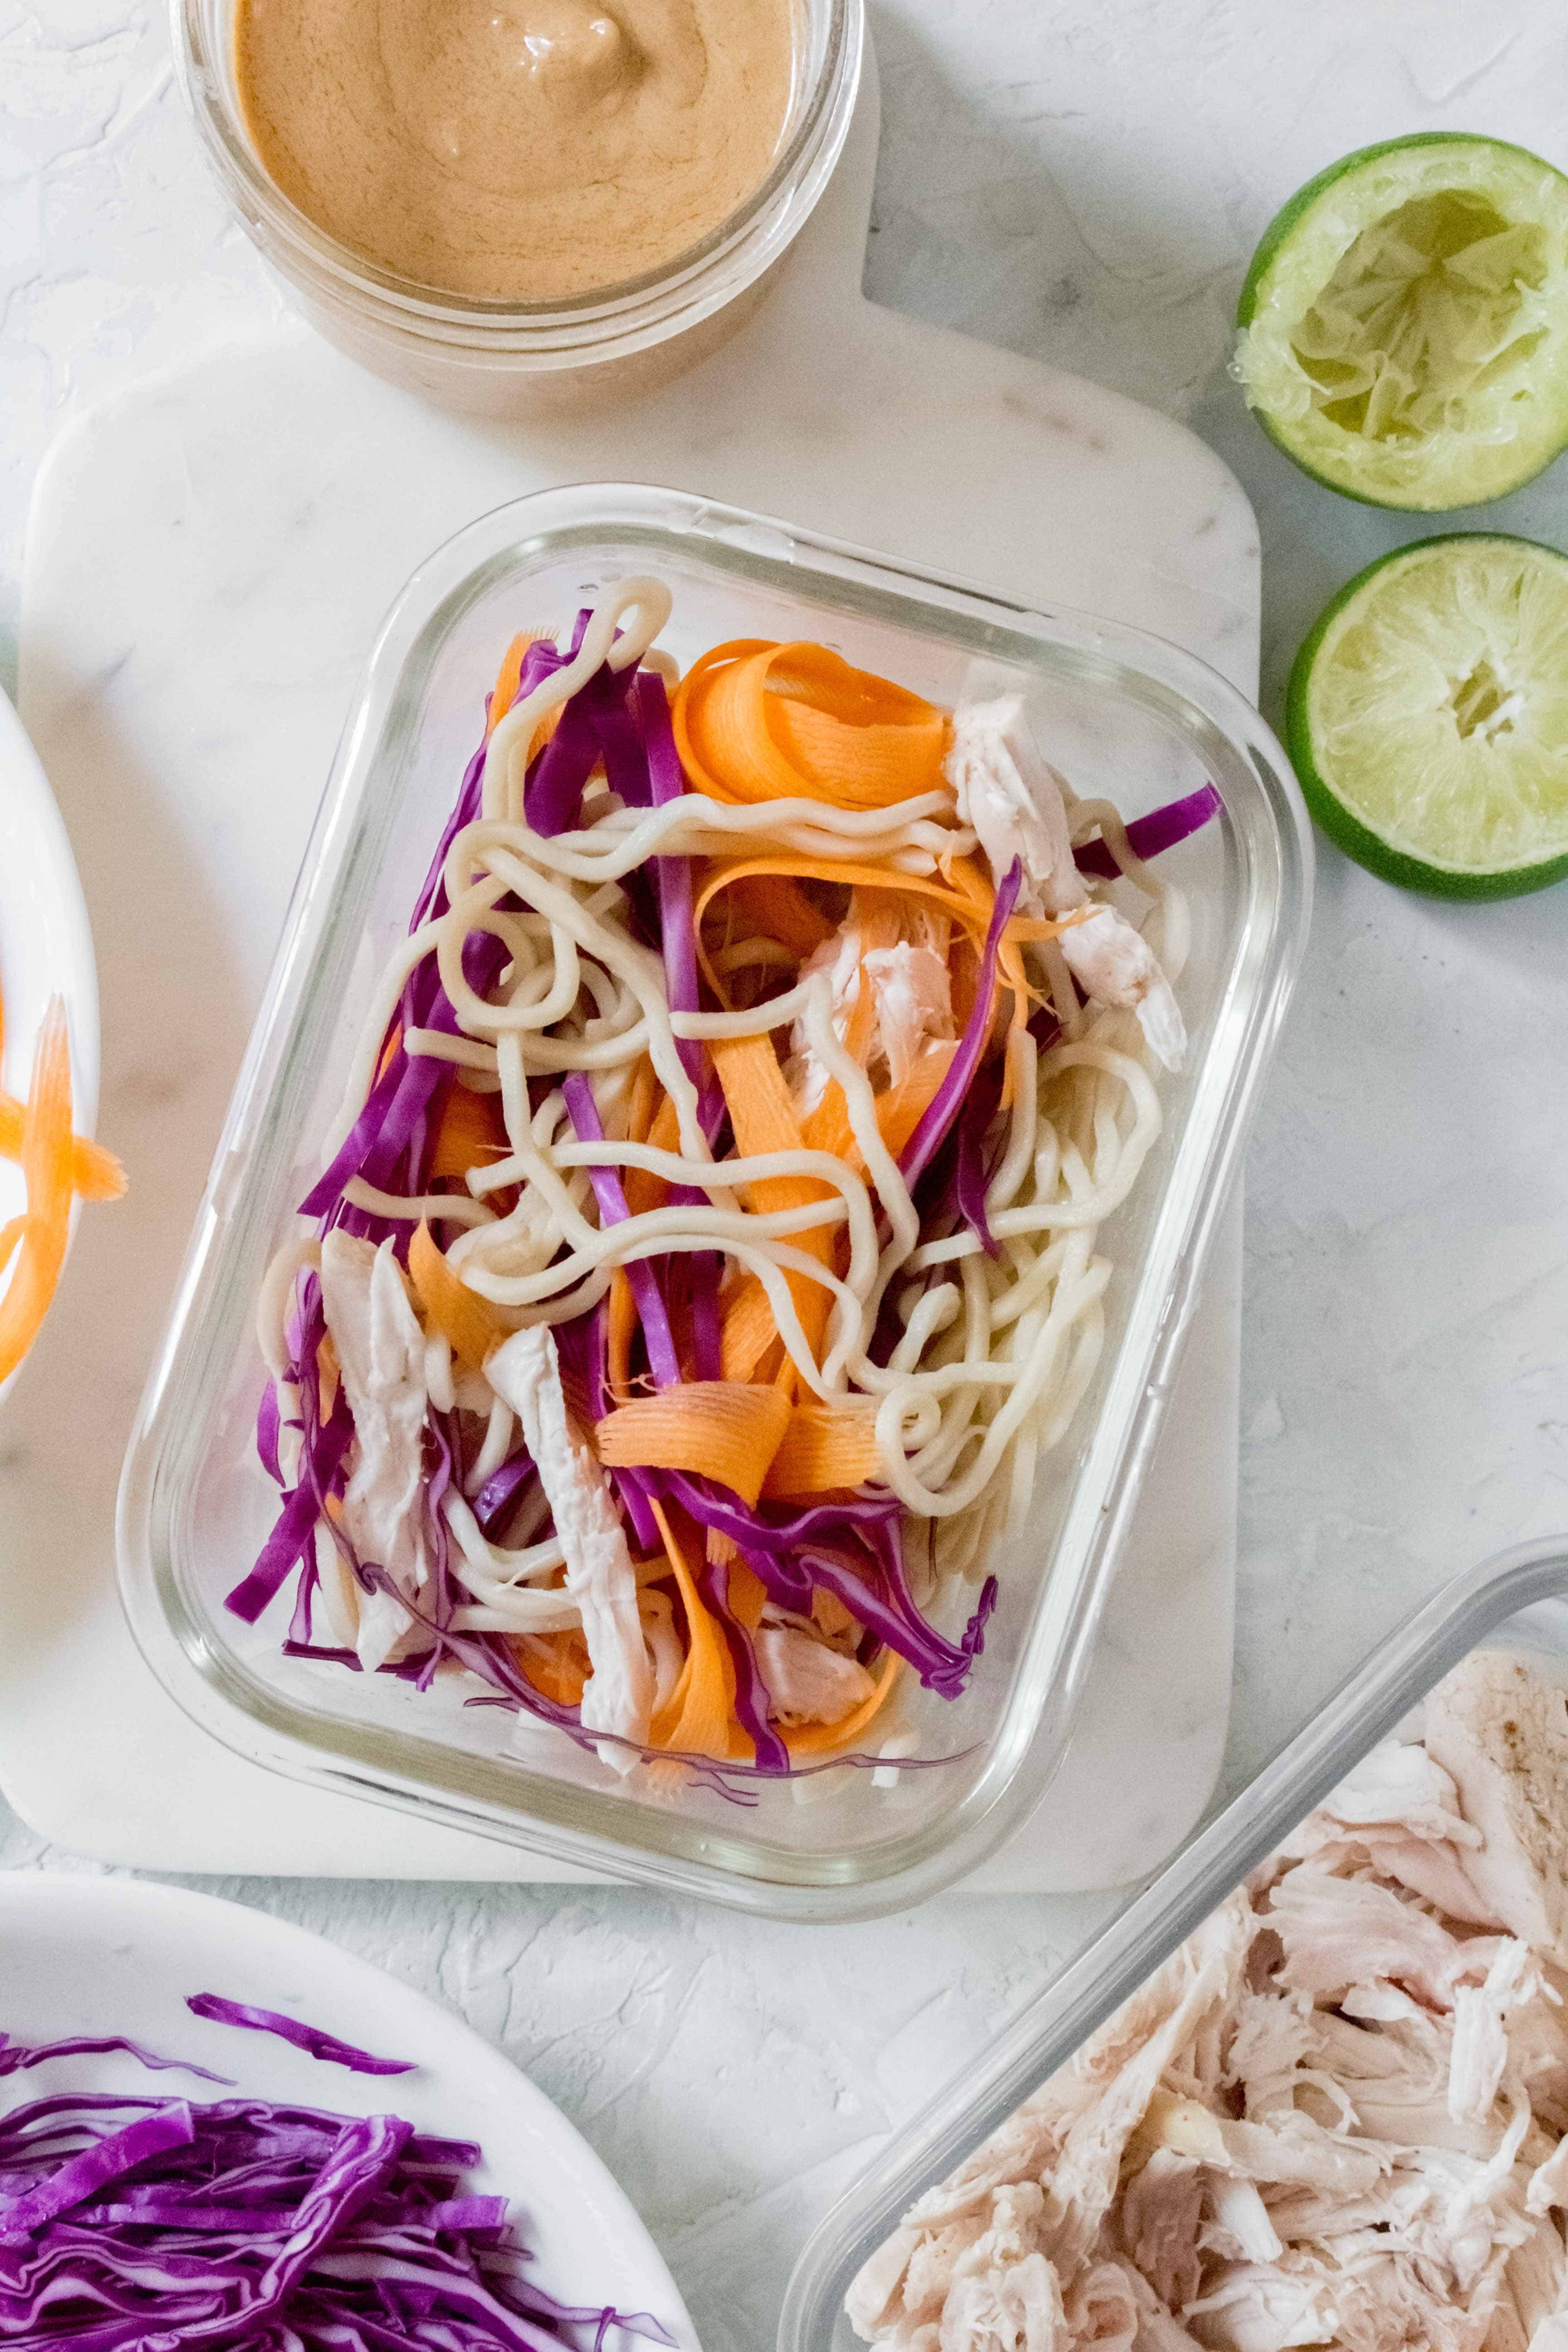 This Cold Chicken Peanut Lime Noodles is so easy to make, customizable, and is a great way to use up leftovers!